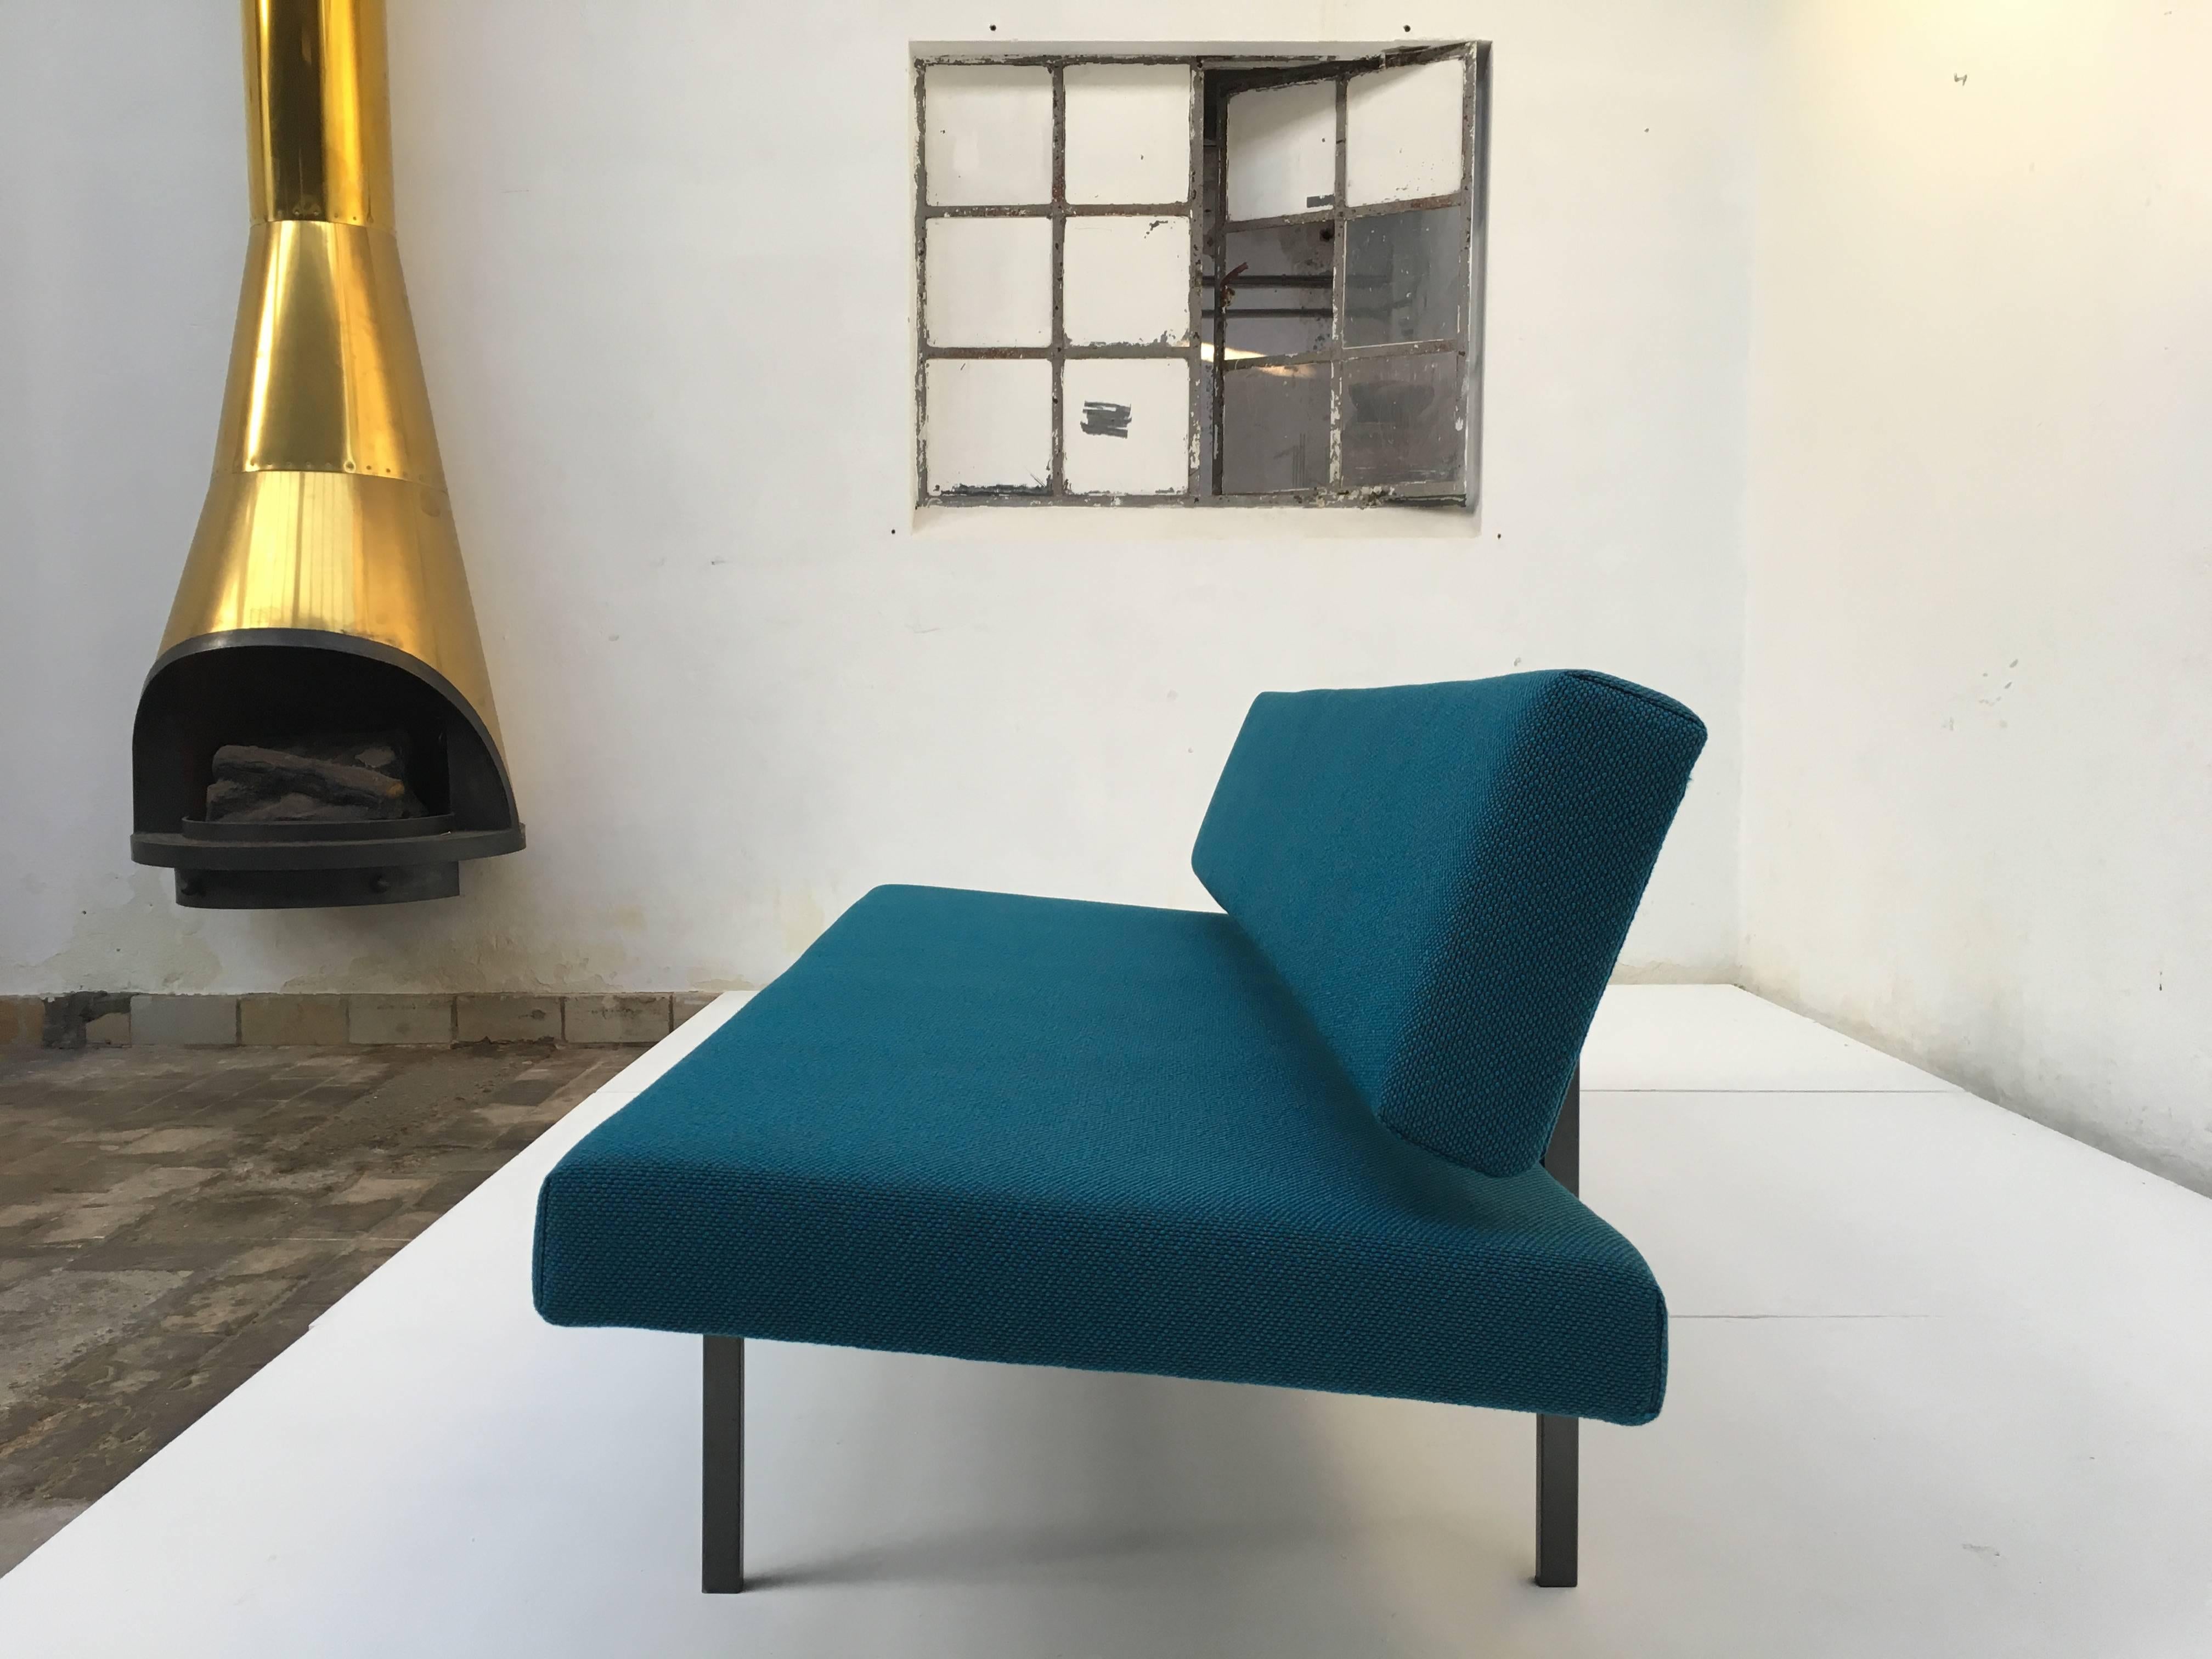 This sleeping sofa in the style of Martin Visser was produced bij Dutch manufacturer van der Sluis in the 1960s.

The seating part can be pulled out to make a bed for guests.

Dutch functional design with a sleek Industrial look.

We